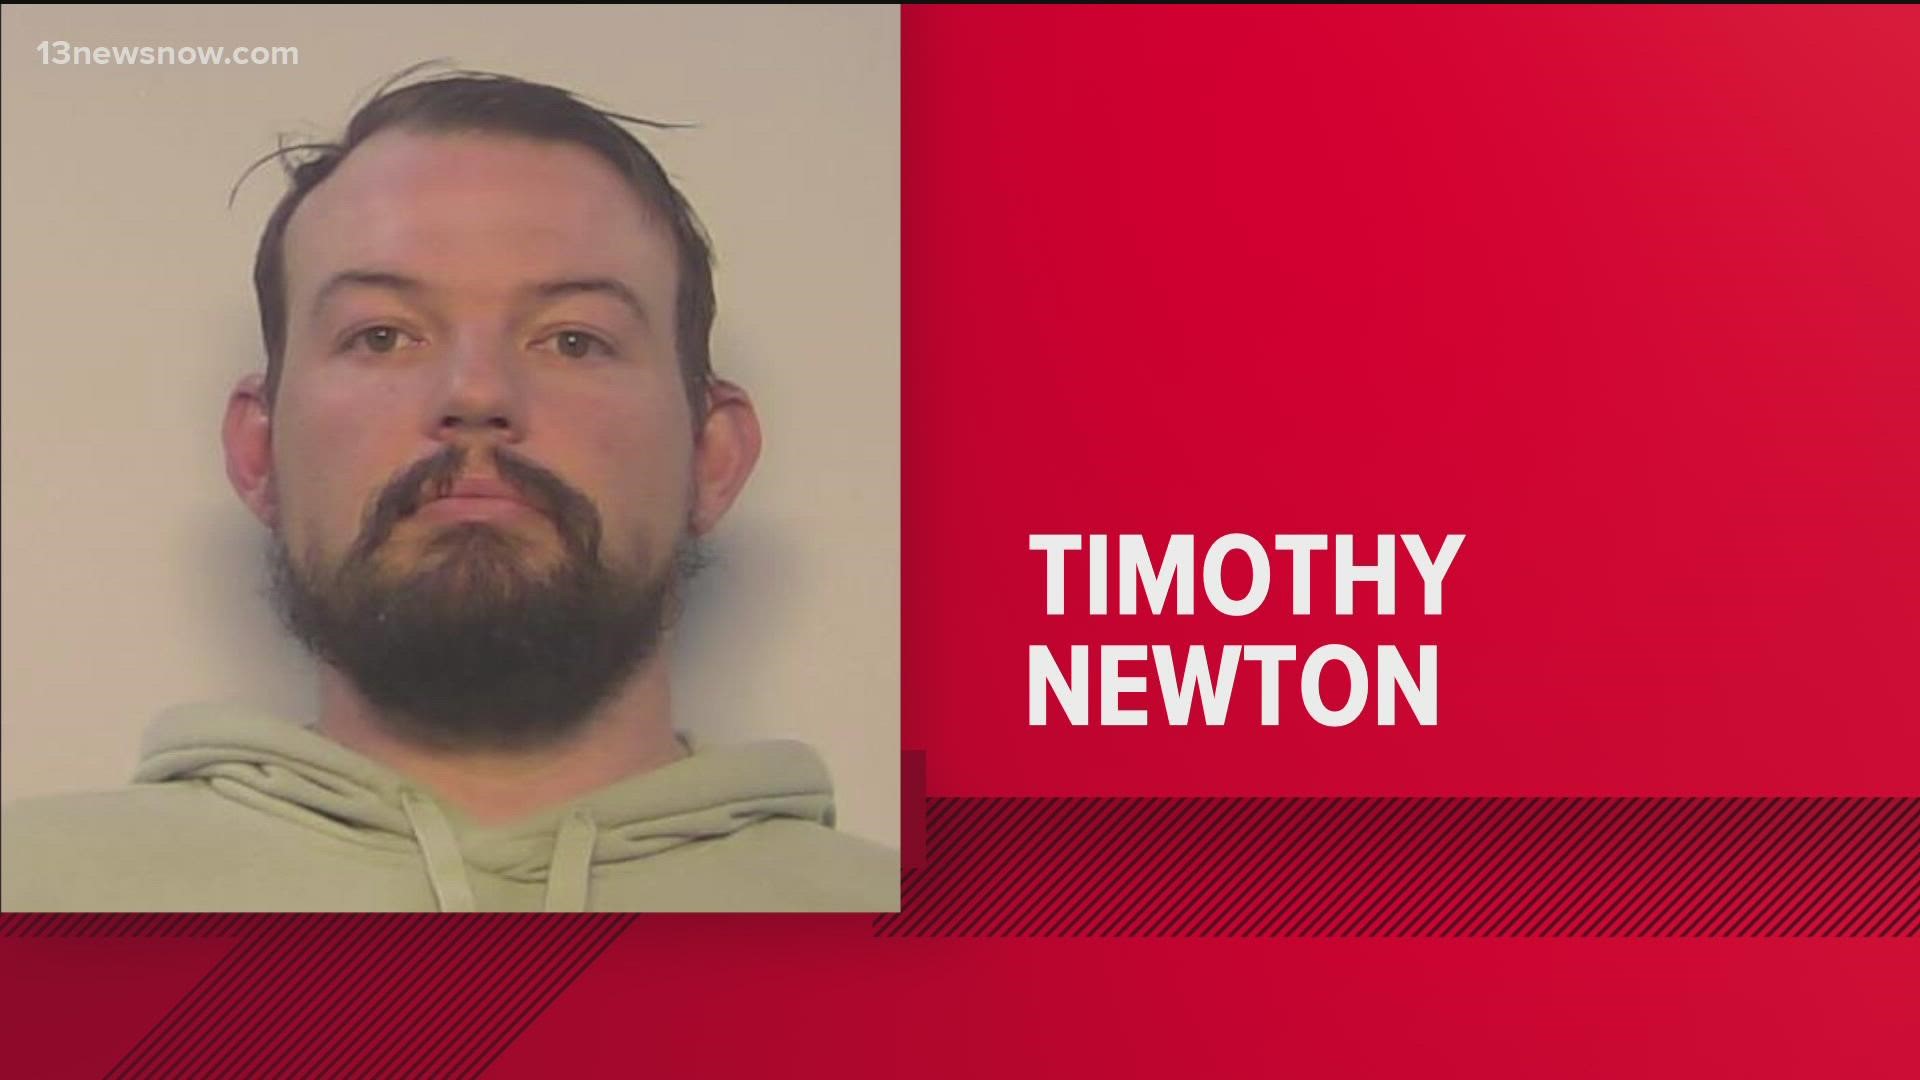 Police say they got a complaint about Timothy Newton earlier this year. He was arrested on Tuesday.